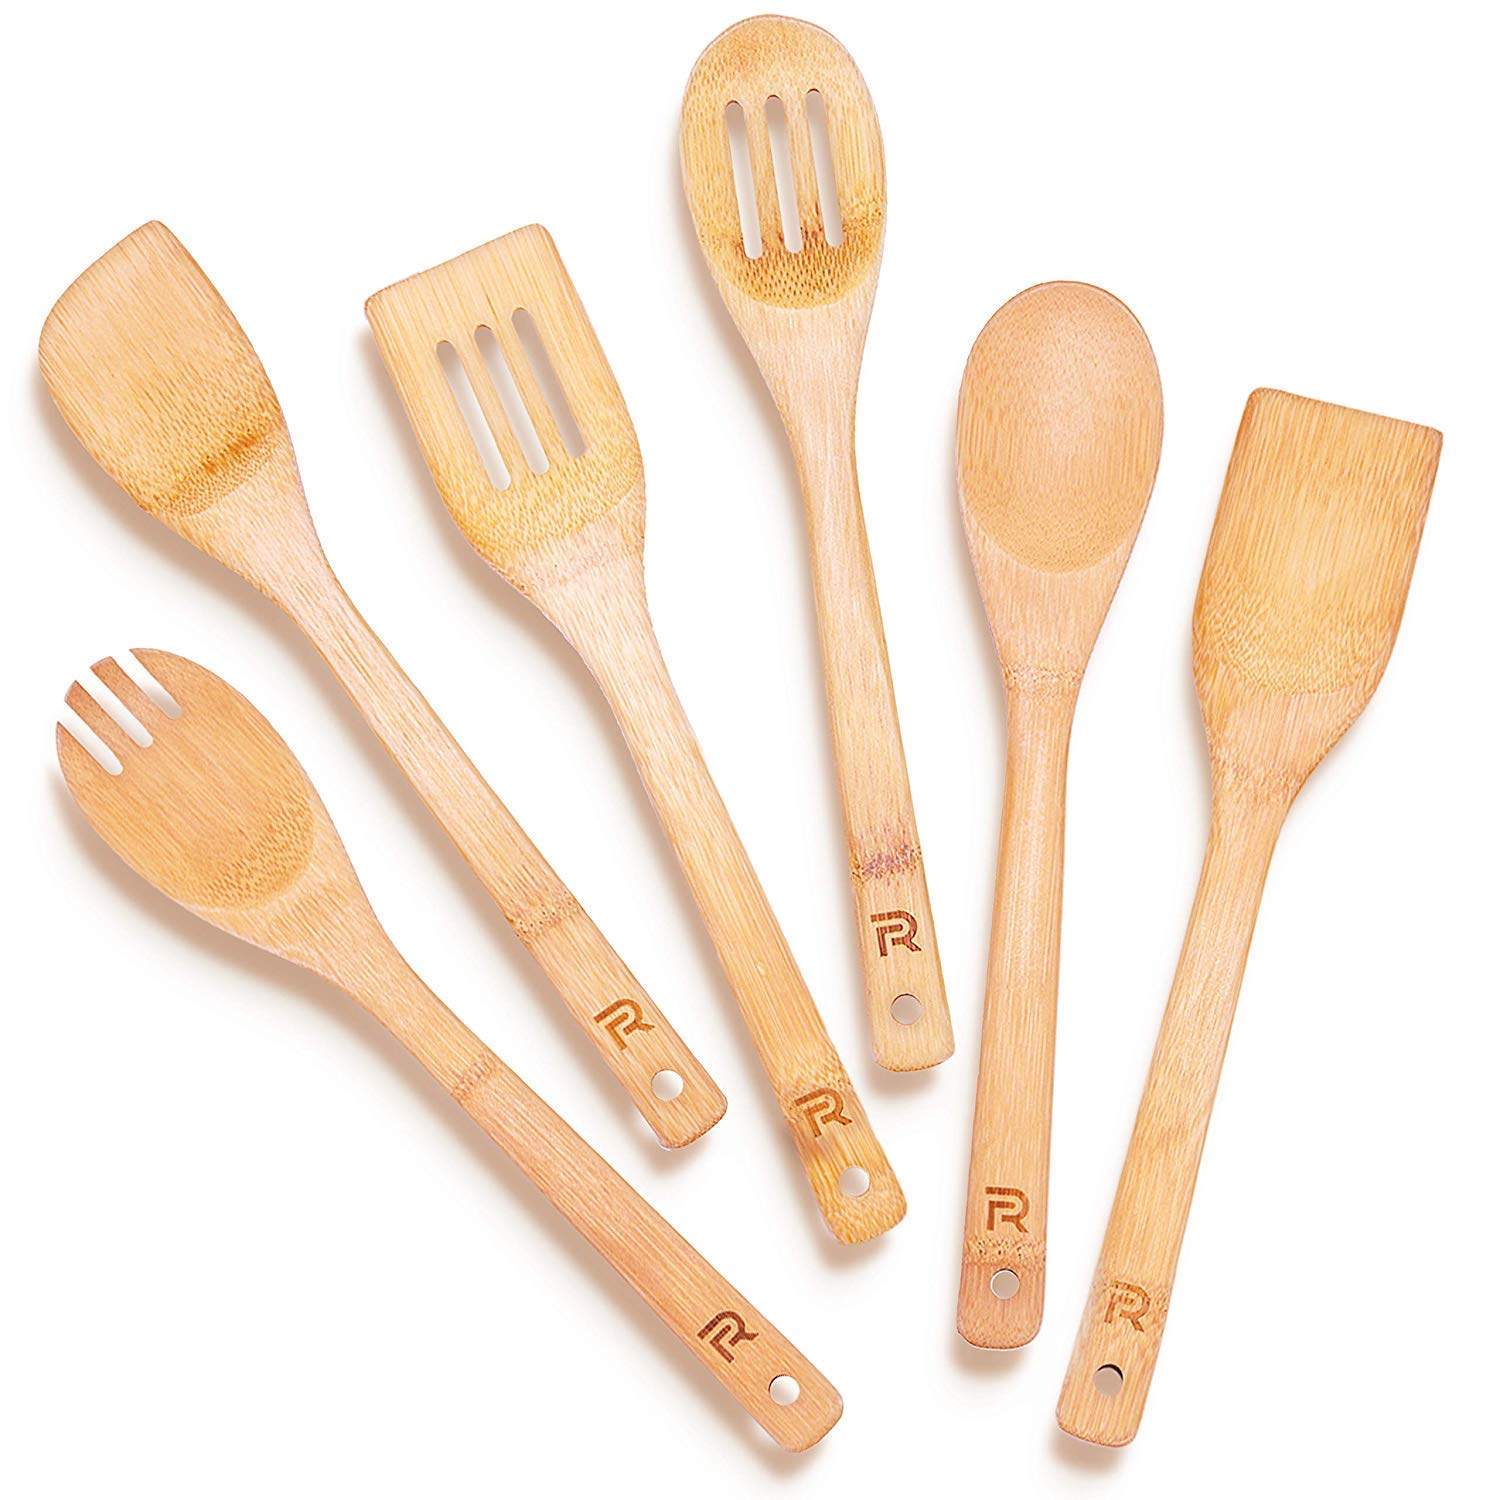 Book Cover Riveira Wooden Spoons for Cooking 6-Piece Bamboo Utensil Set Apartment Essentials Wood Spatula Spoon Nonstick Kitchen Utensil Set Premium Quality Housewarming Gifts Wooden Utensils for Everyday Use